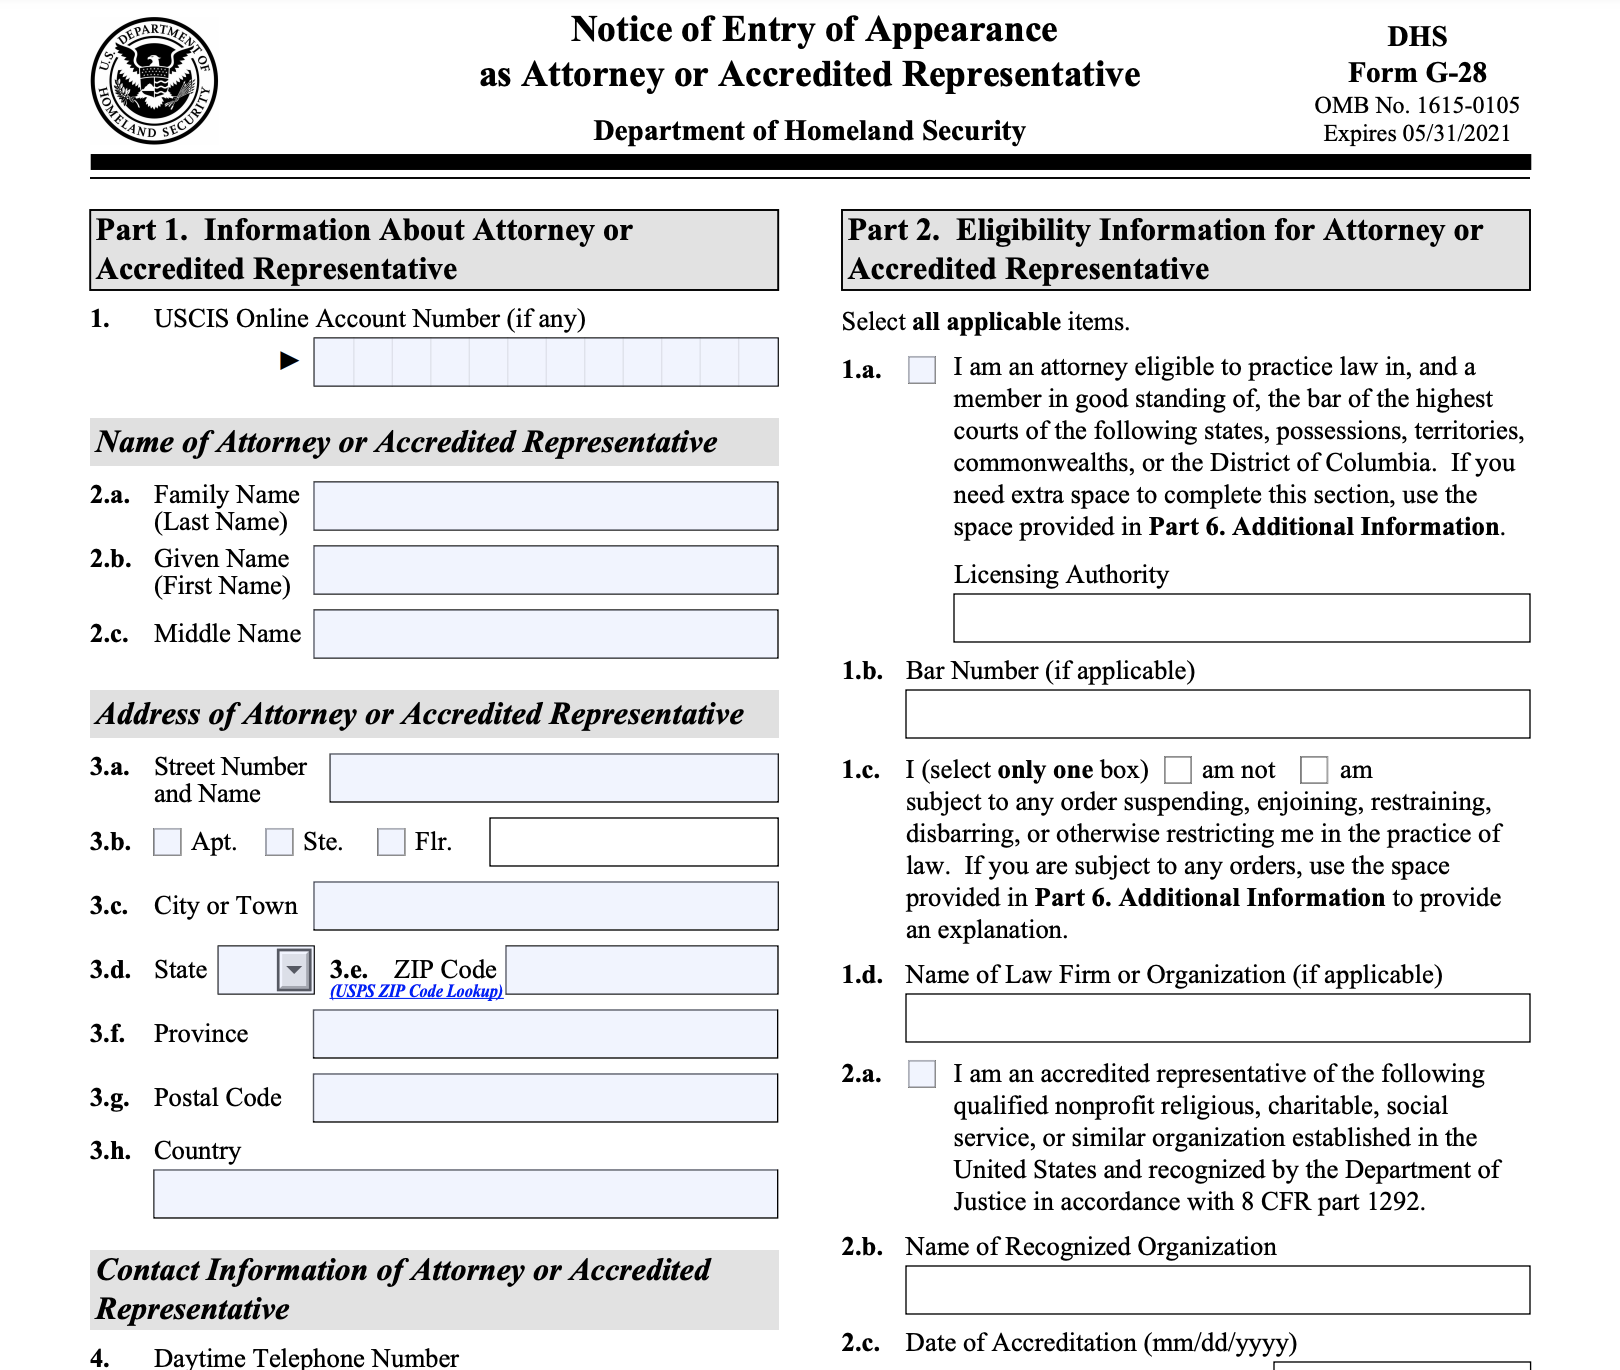 complete-guide-to-form-g-28-notice-of-entry-of-appearance-as-attorney